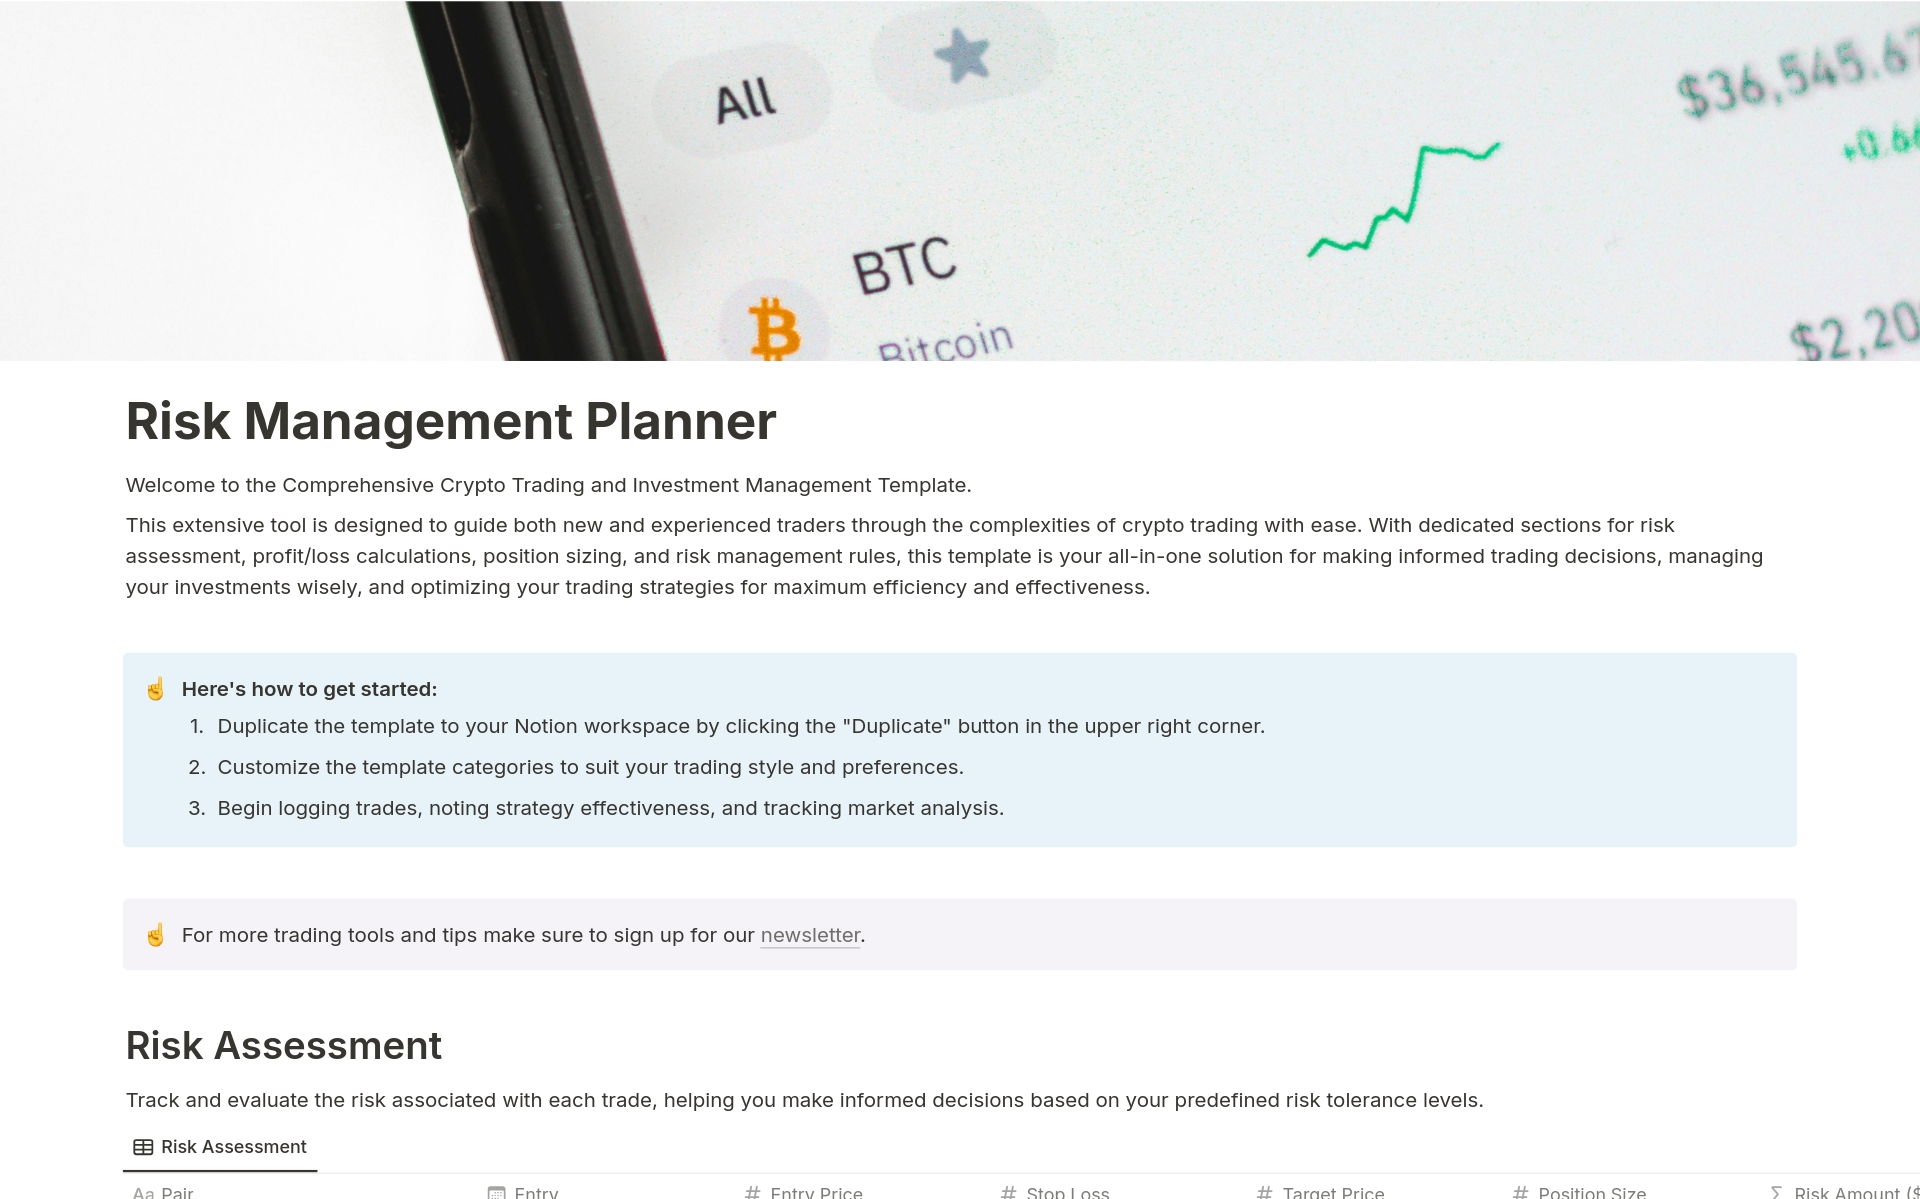 Unlock your trading potential with our comprehensive Crypto Trading Management Template. Streamline risk assessment, optimize position sizing, and enhance strategy with our all-in-one toolkit.